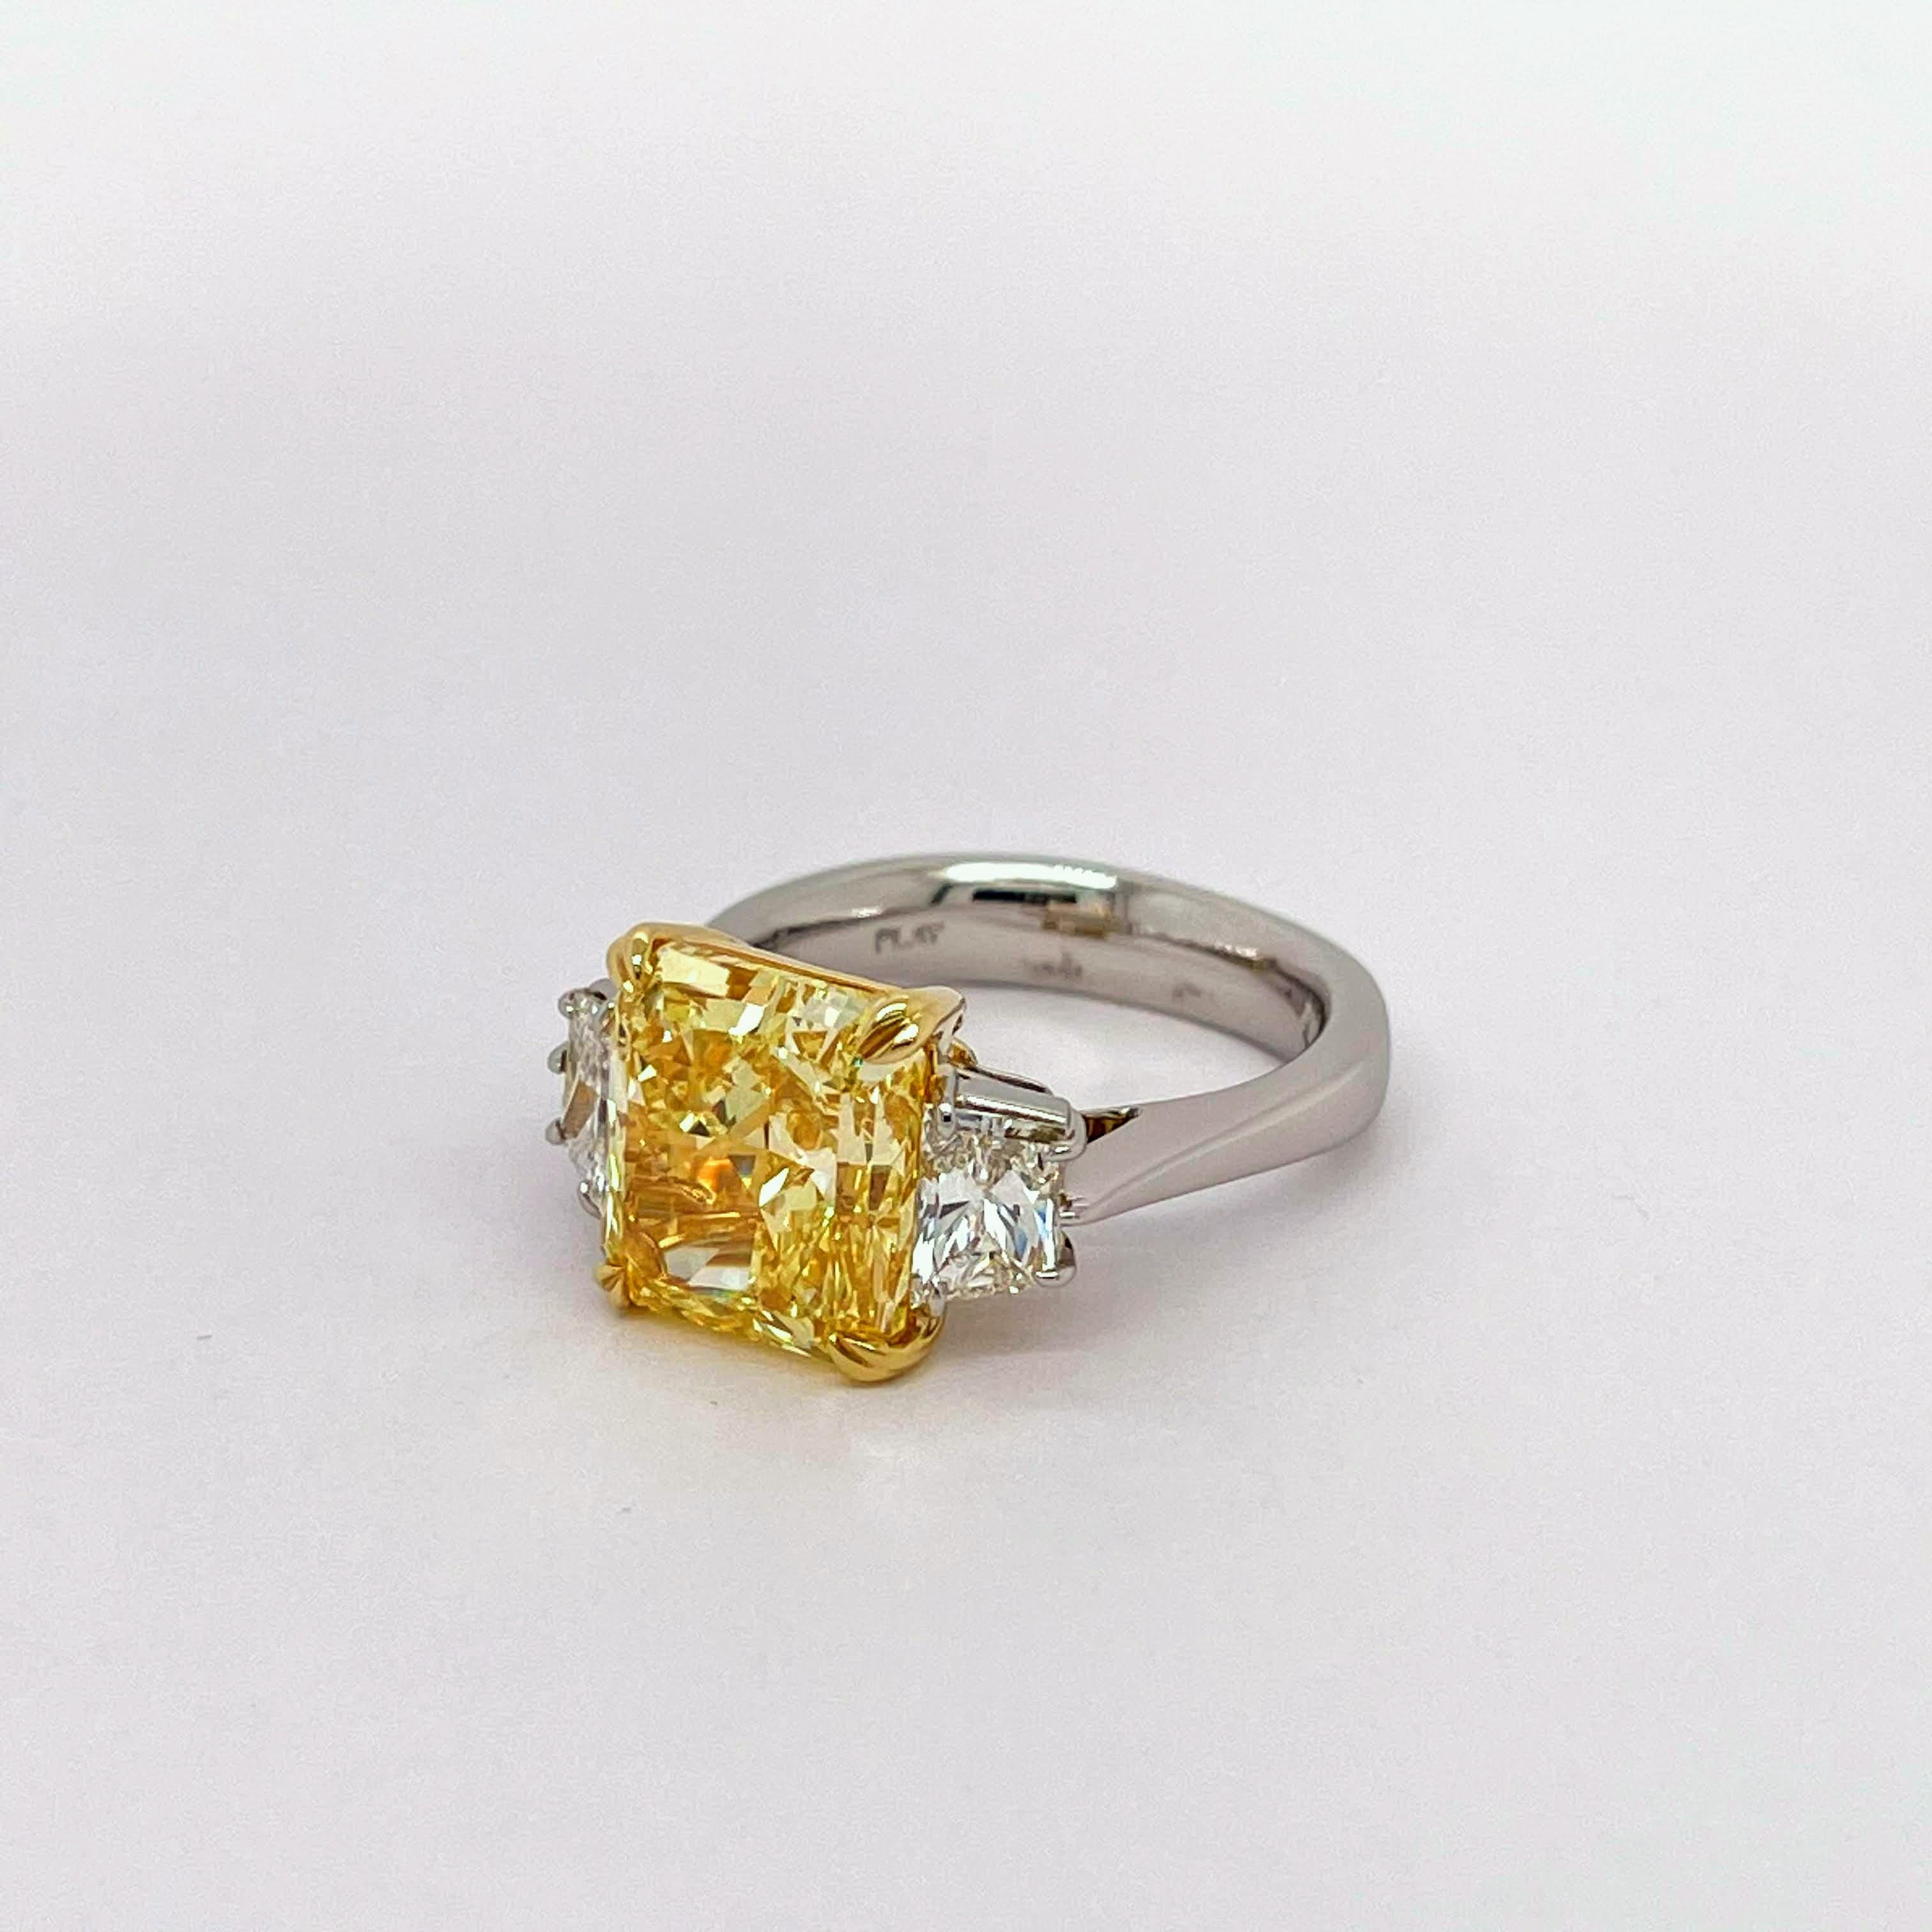 GIA Certified Radiant Shape Cut Diamond 6.17, Fancy Intense Yellow Color VVS1 Clarity together with the 0.94 trapezoids on each side to accentuate the center stone even more. Lays on a beautiful Platinum setting & 18K Yellow Gold basket and prongs